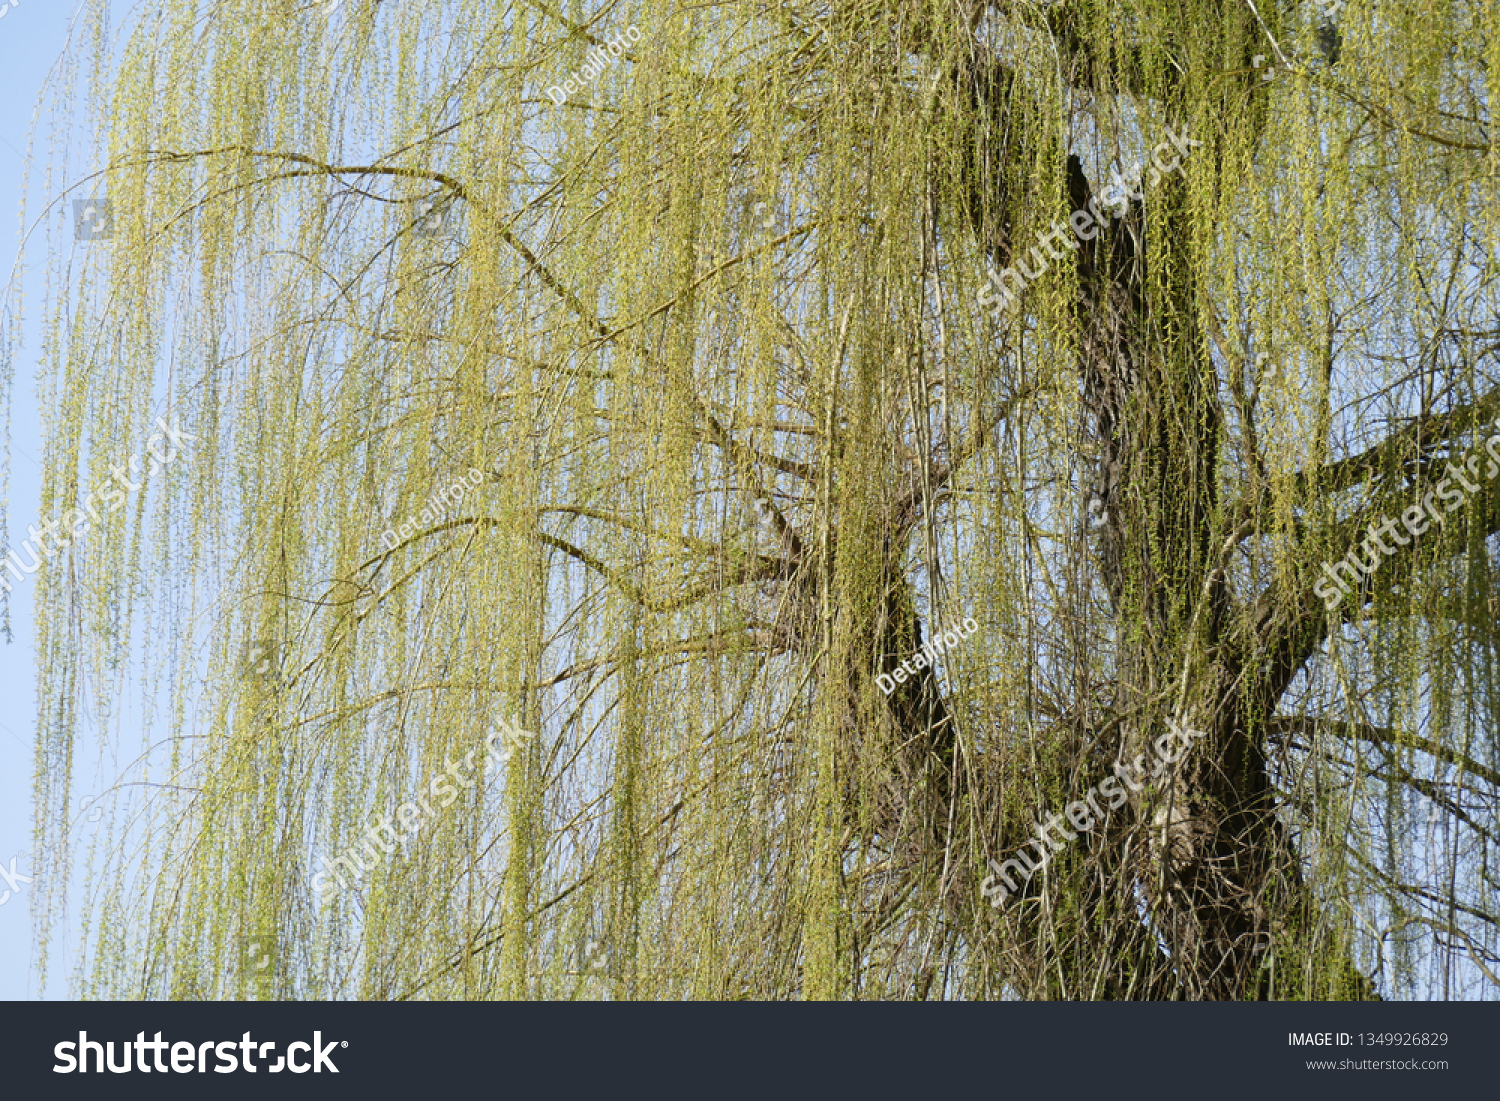 Green-yellow willow branches in spring, branches, branches, blue sky, Germany, Europe #1349926829